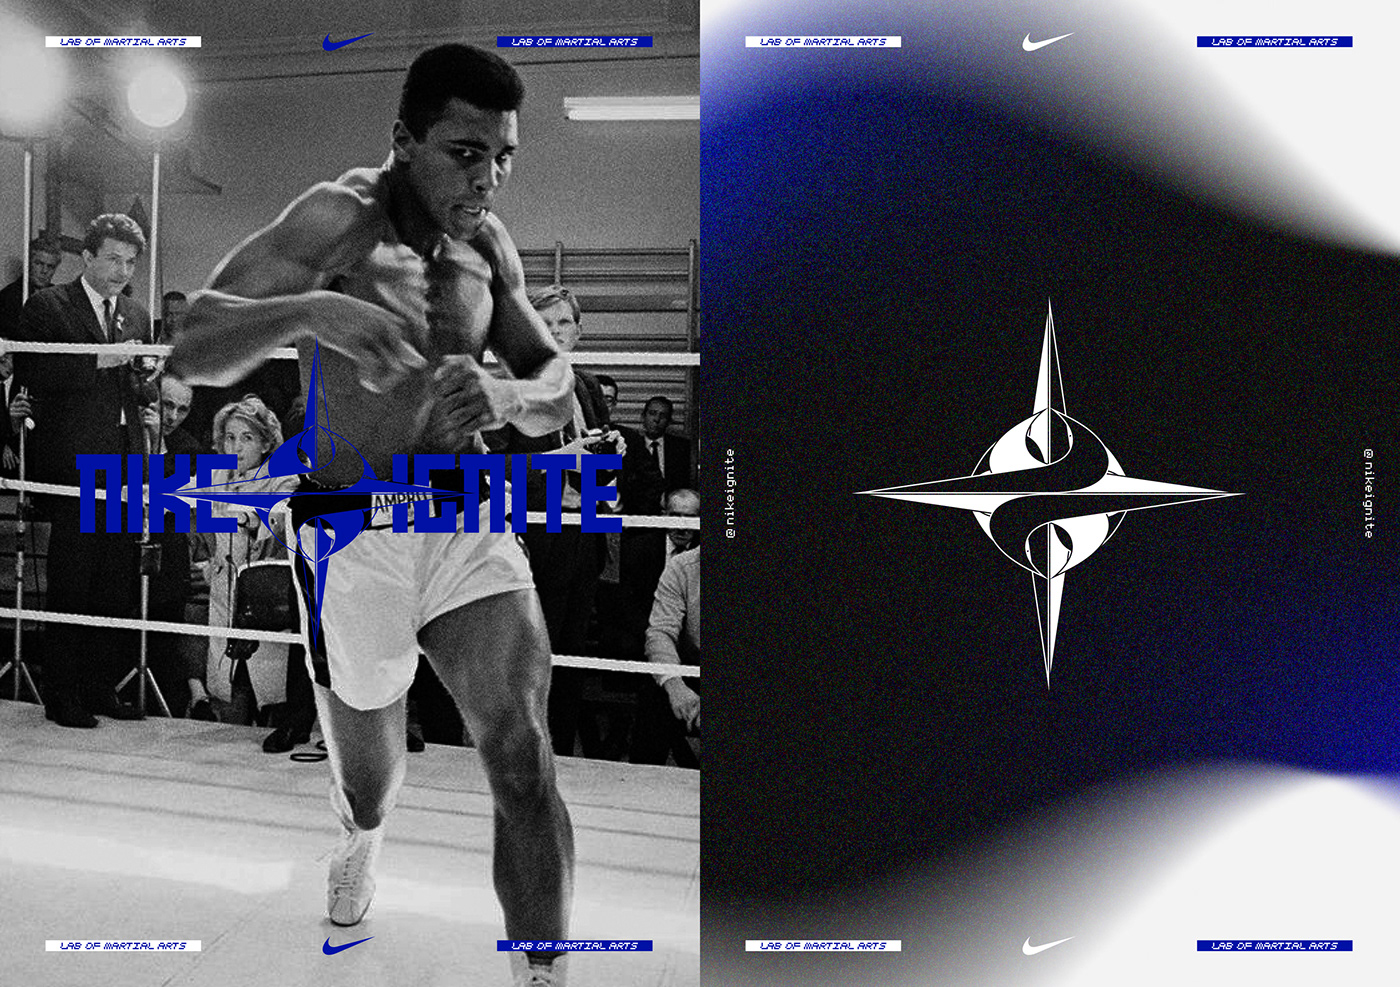 Boxe Martial Arts fight MMA UFC Boxing gym sport fighters muhammad ali